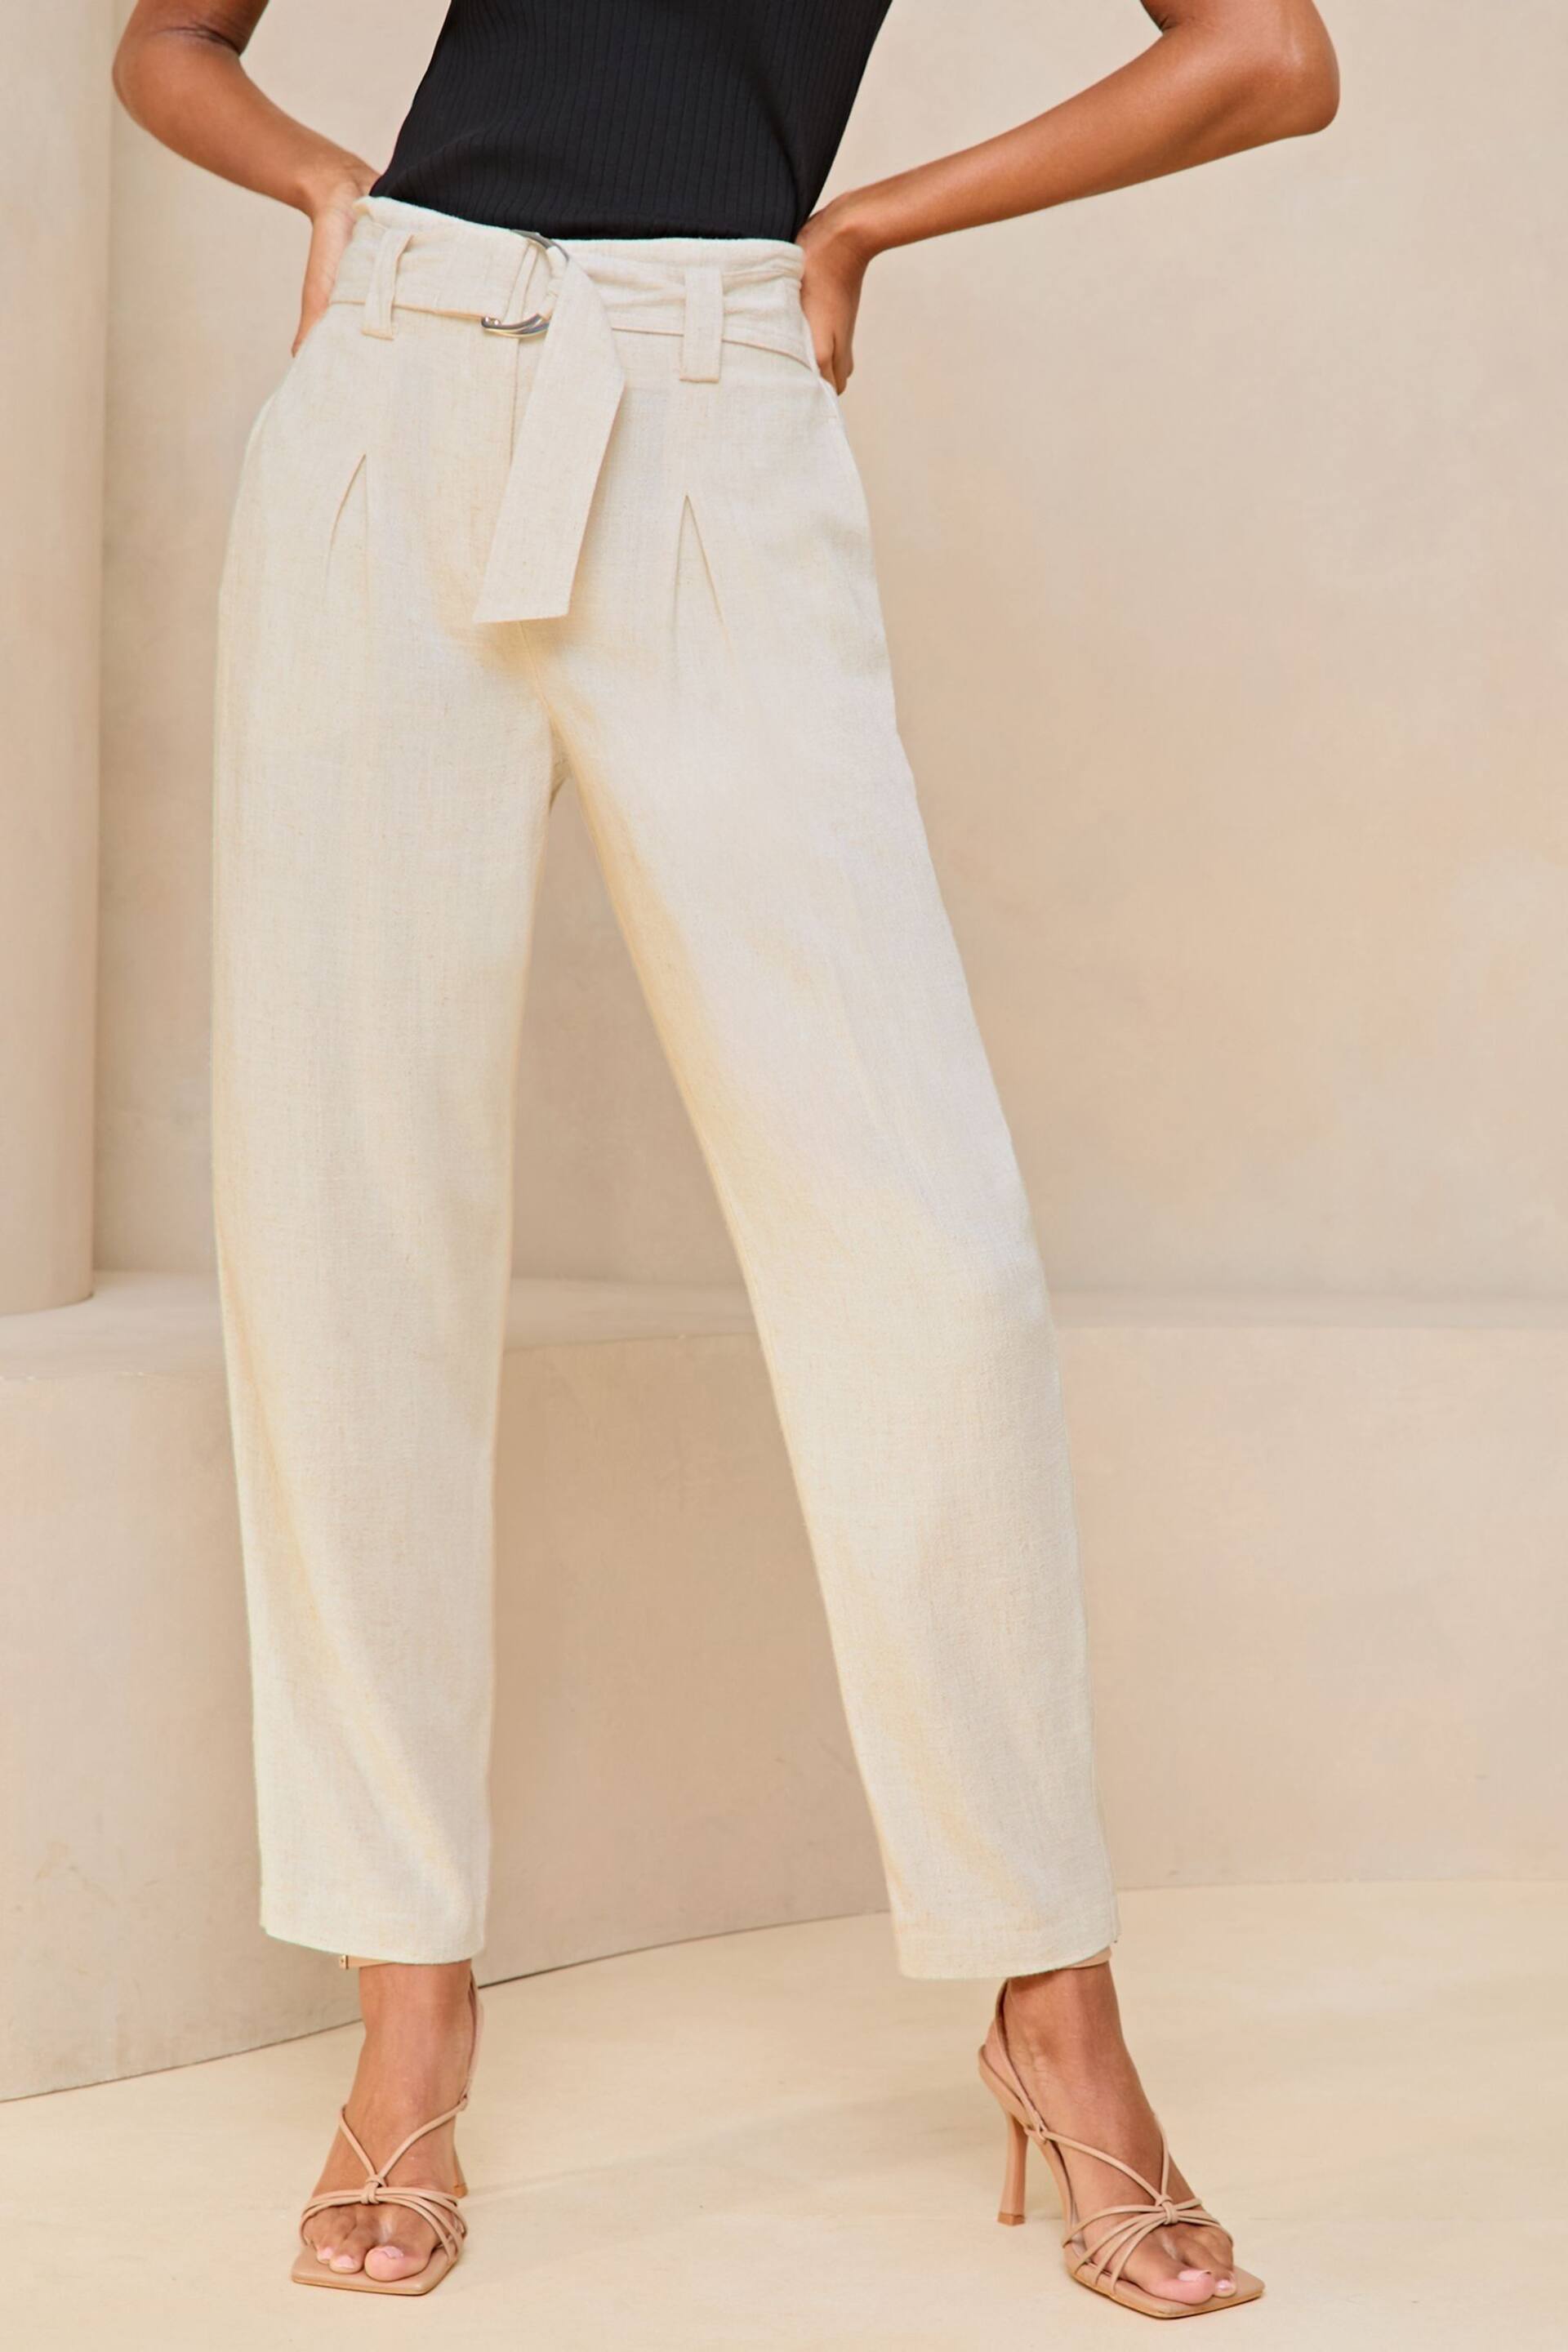 Lipsy Cream Tapered Belted Smart Trousers - Image 1 of 4